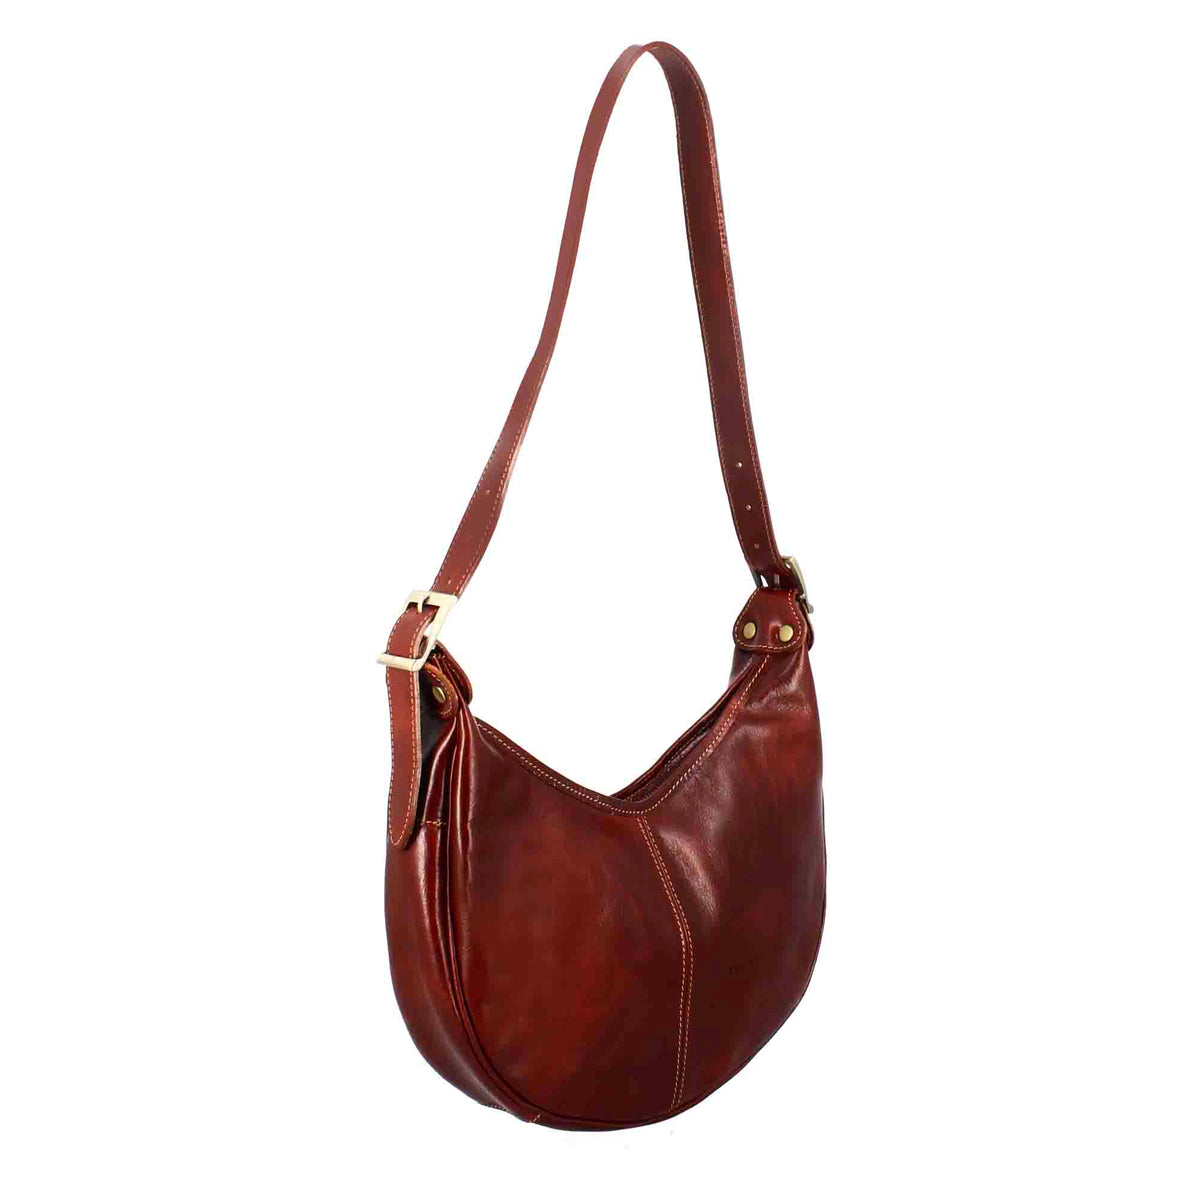 Classic women's City shopper bag in brown smooth leather